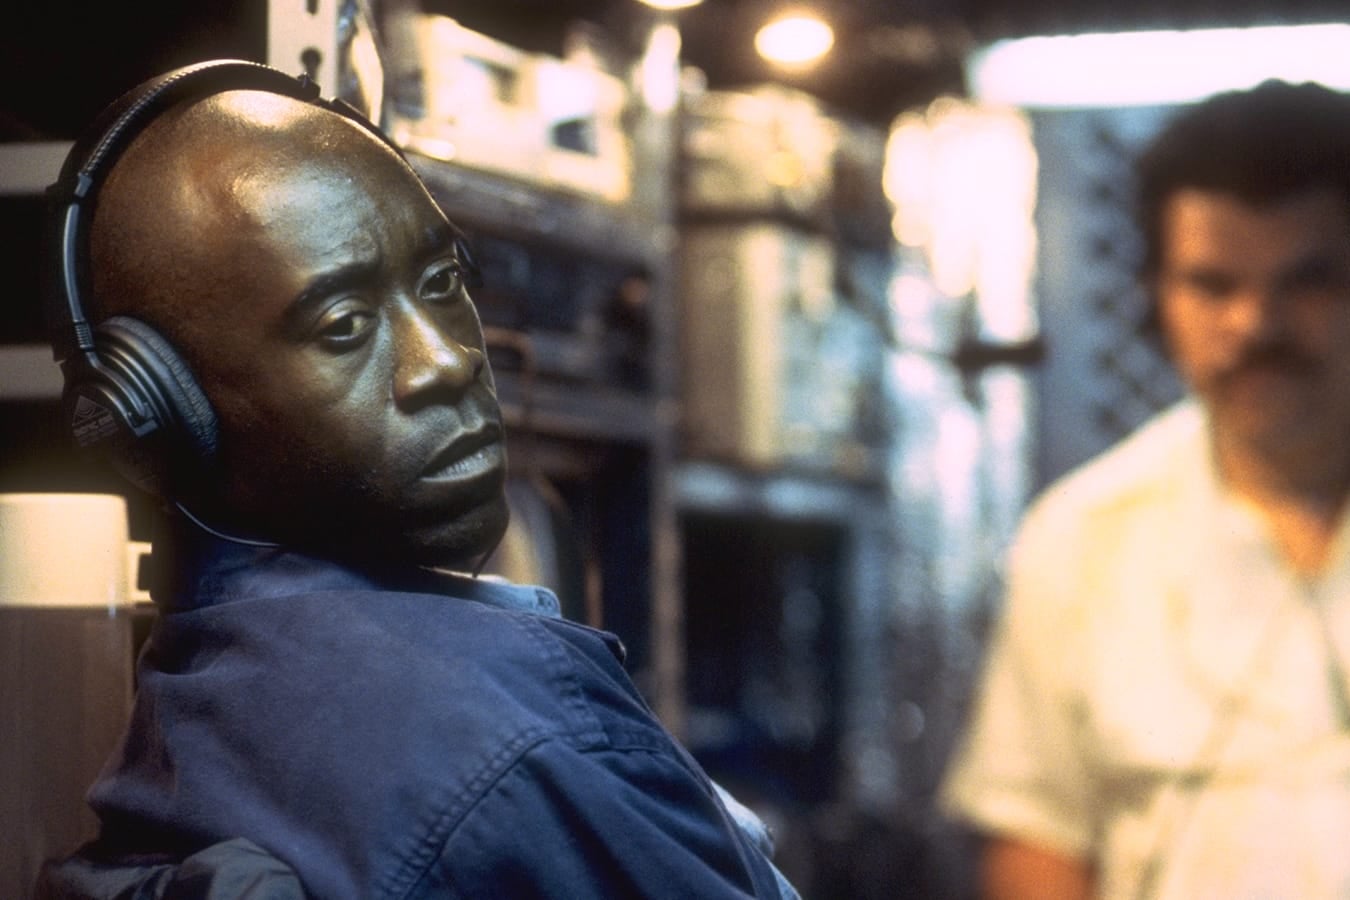 A still of Don Cheadle as Montel Gordon in the film Traffic.